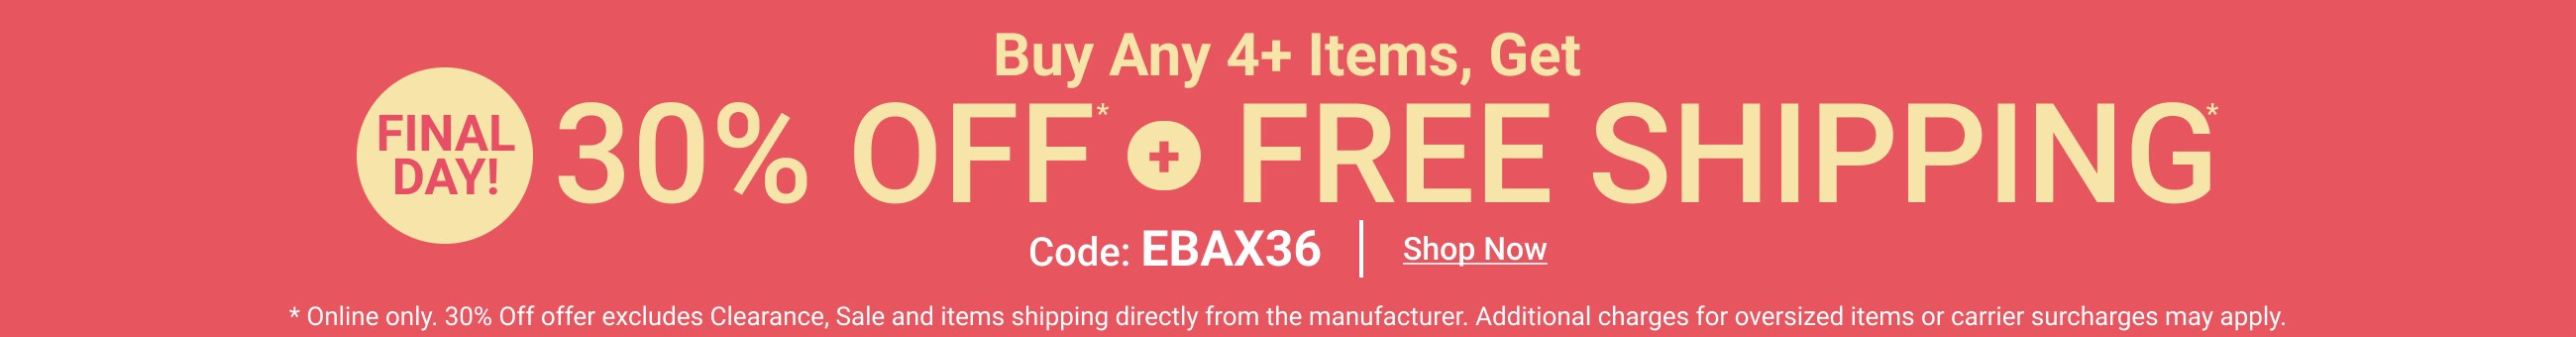 Buy Any 4+ items, get 30% Off and free shipping - Shop Now